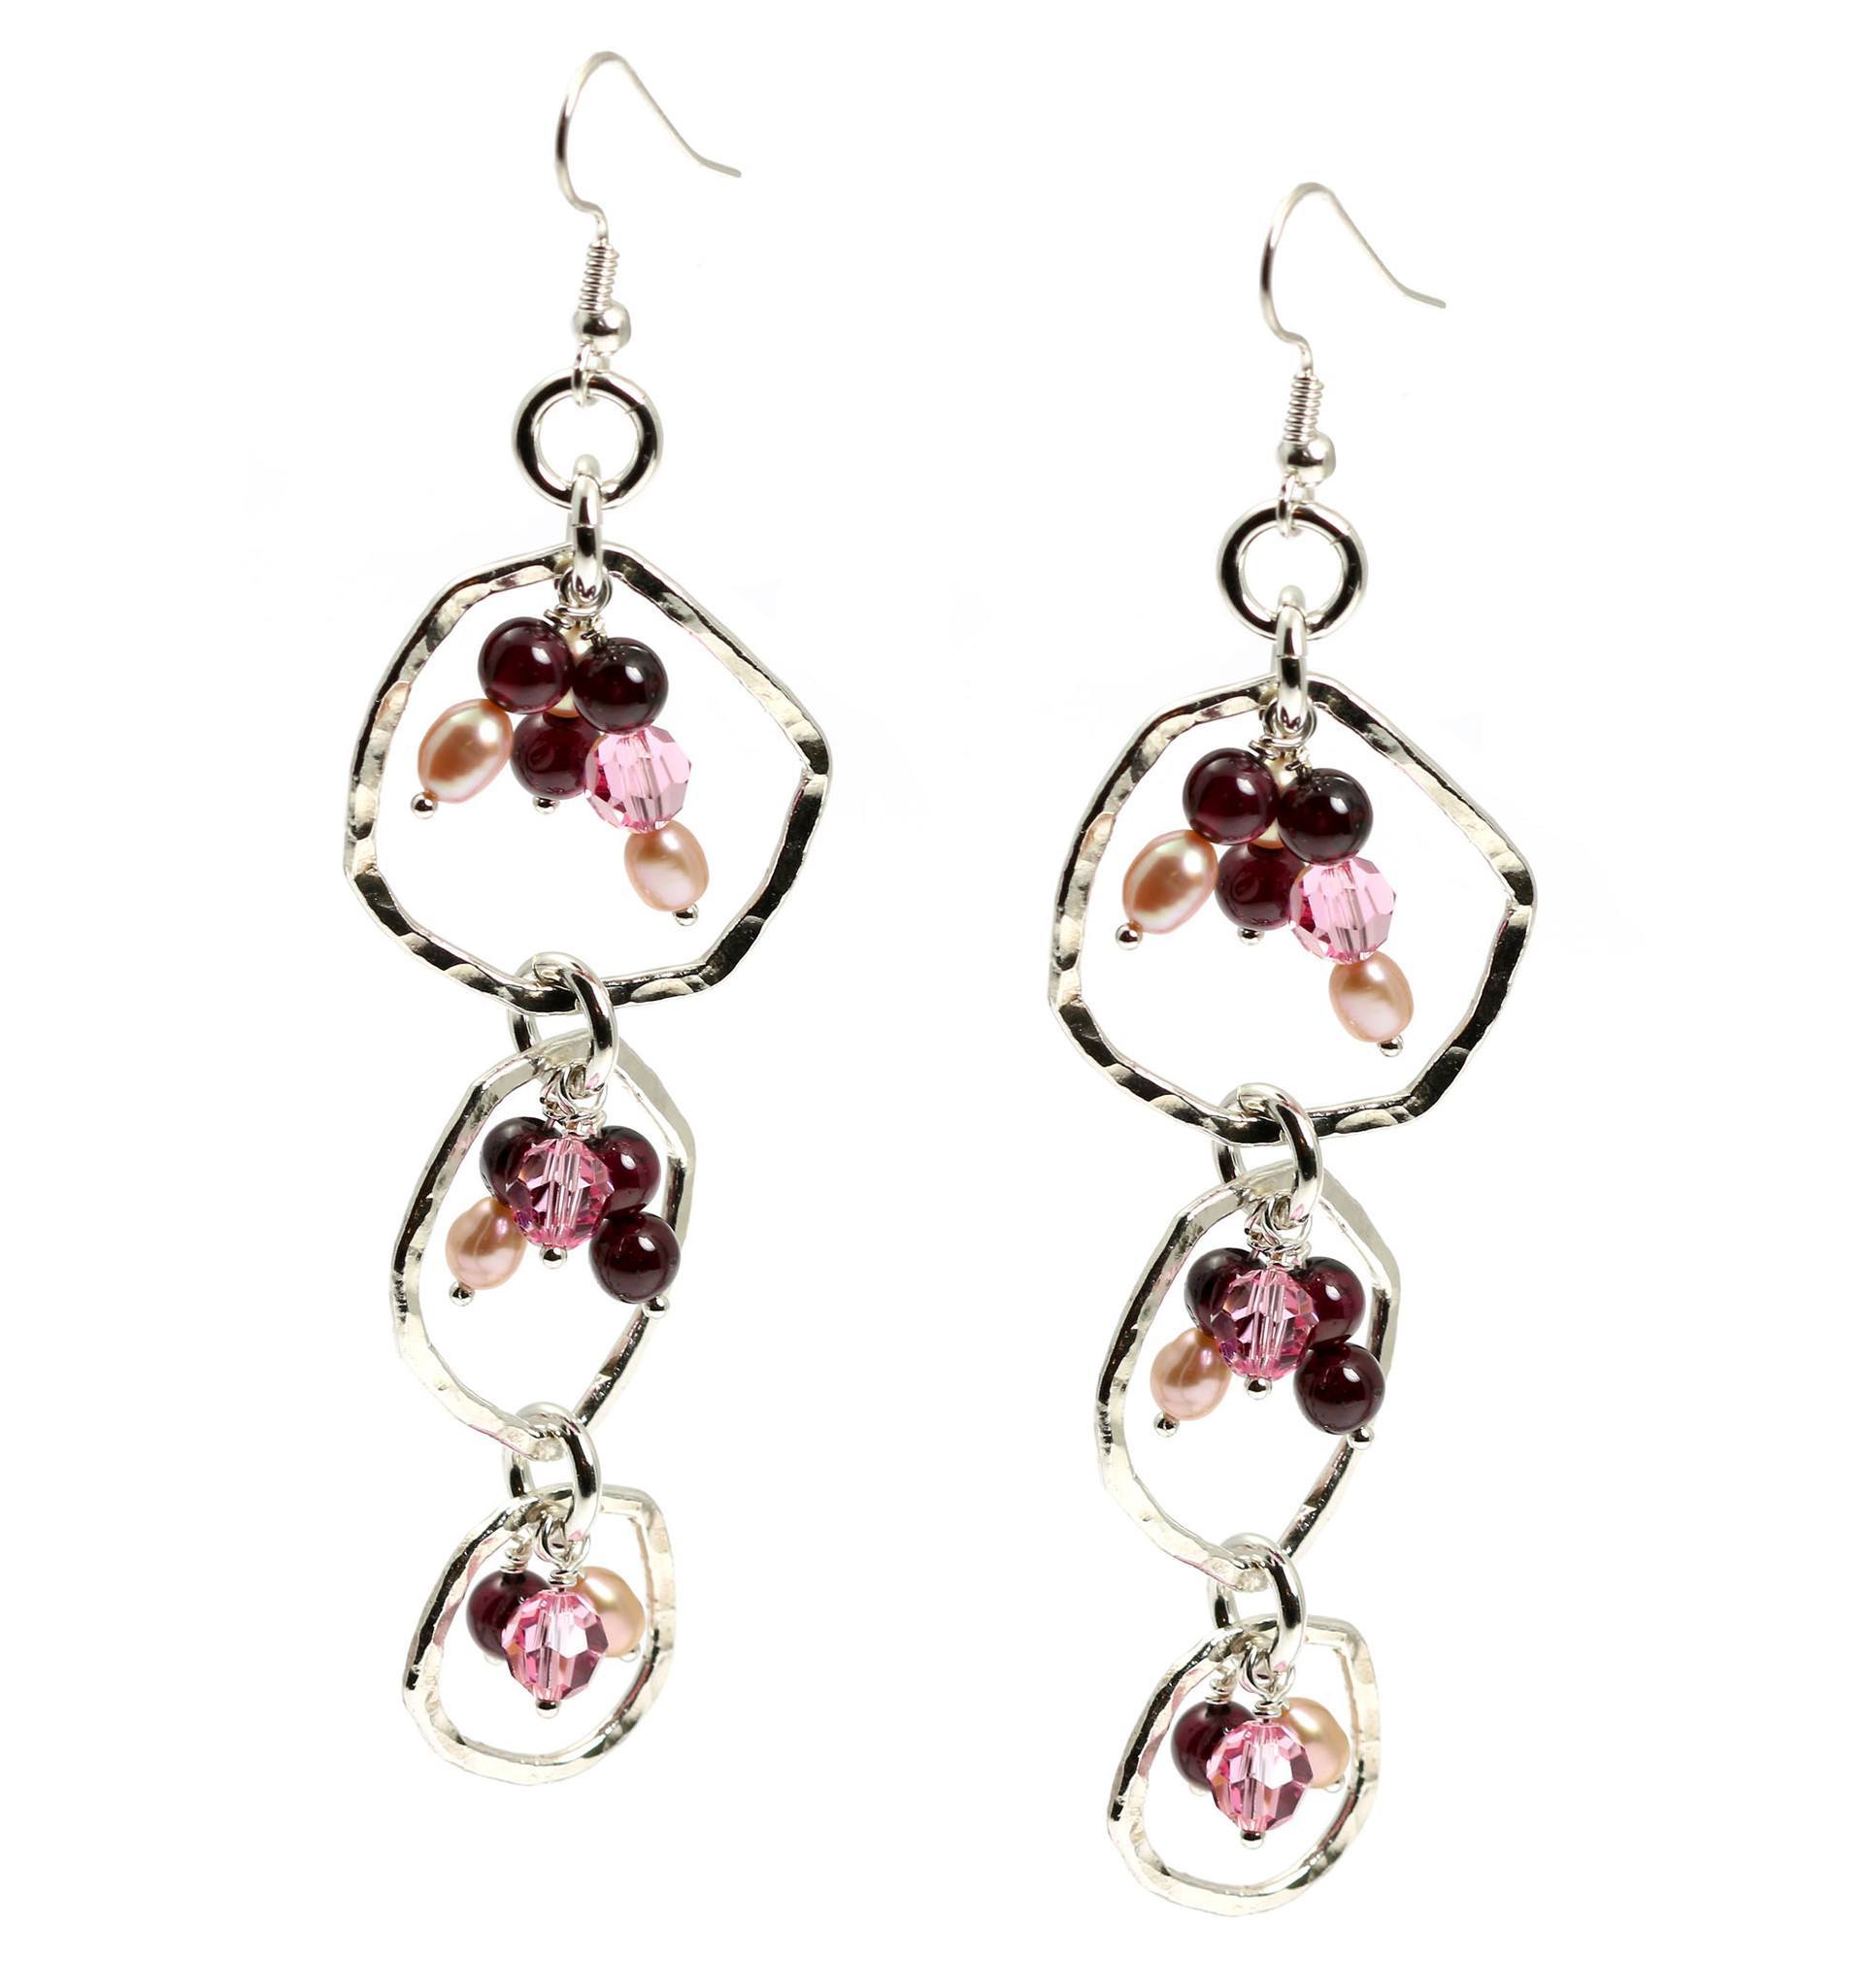 Hammered Fine Silver Earrings with Garnets